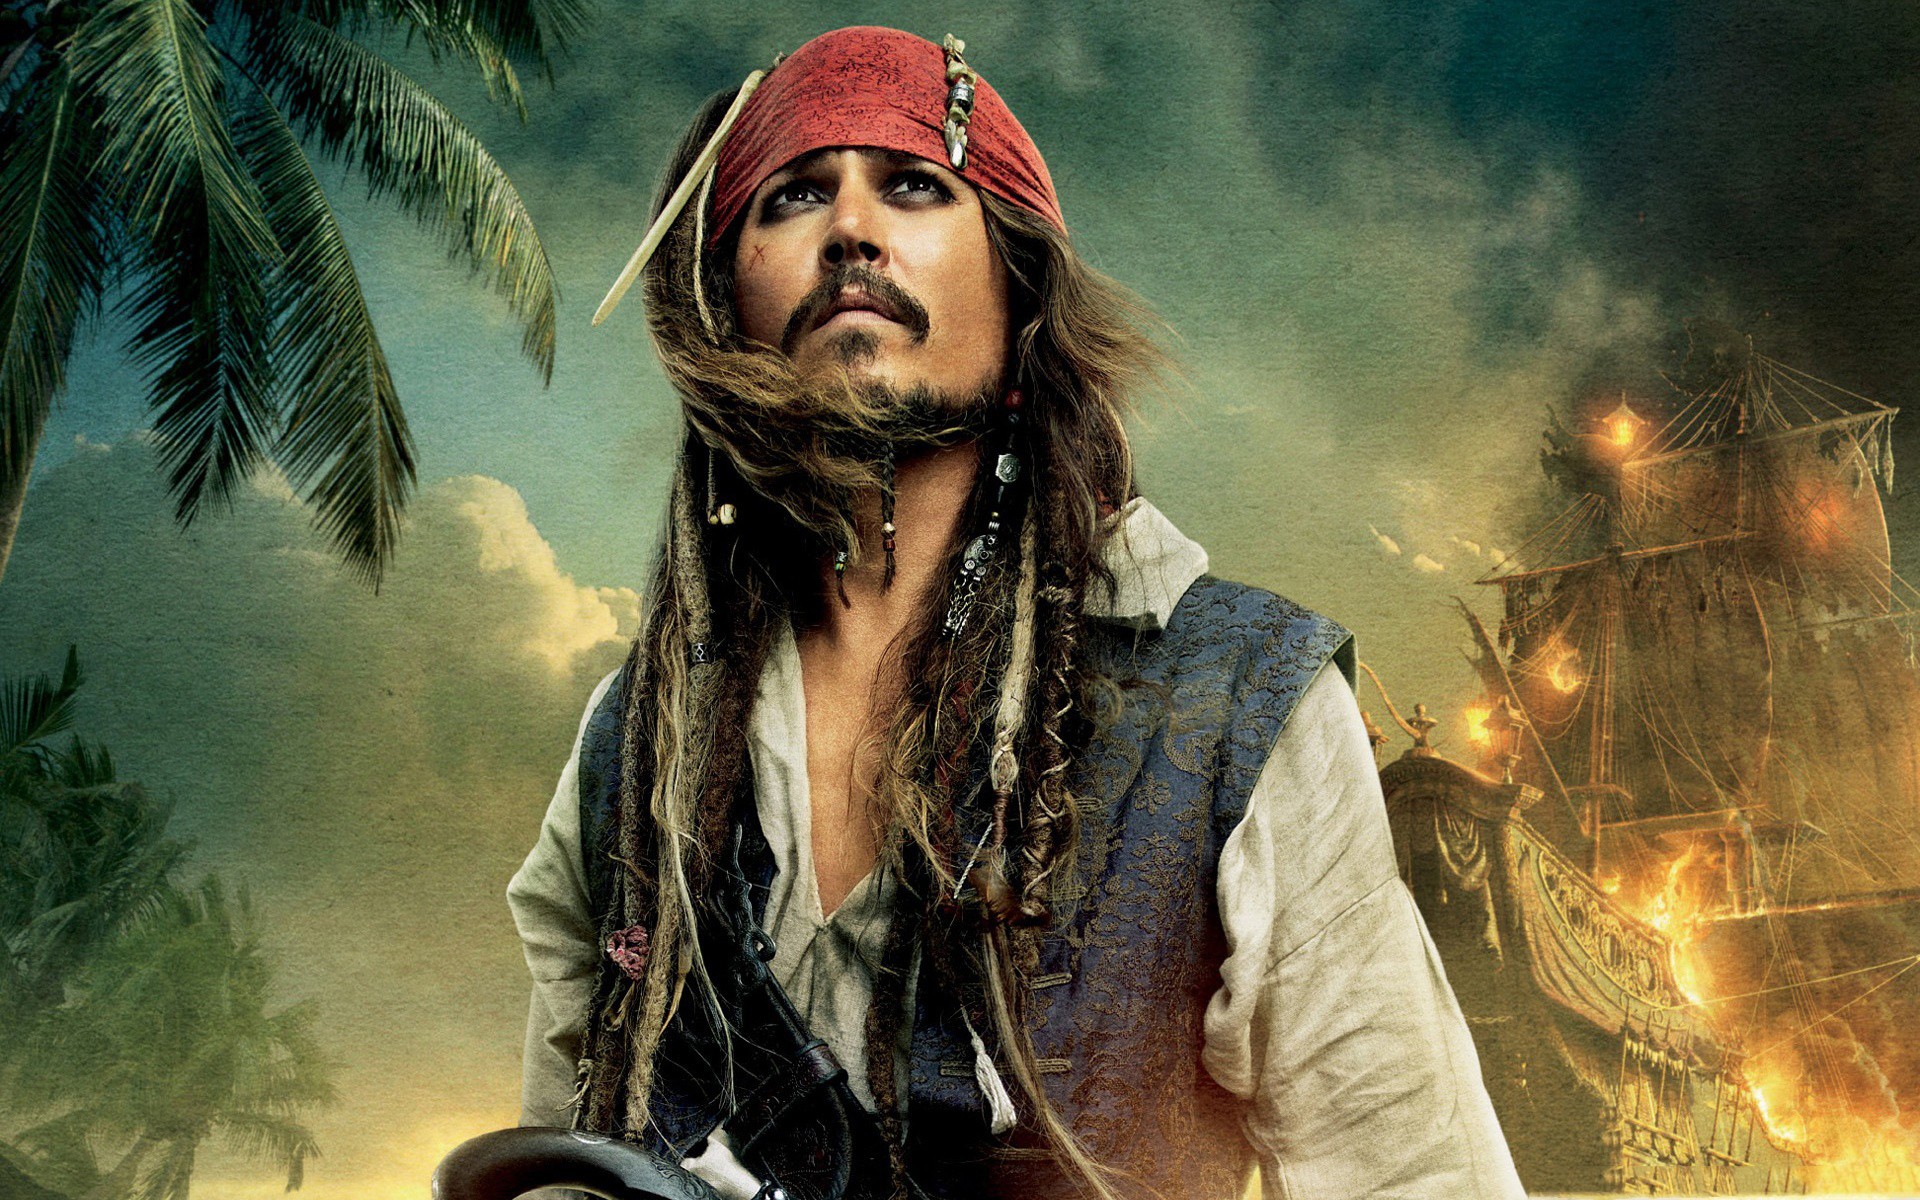 Pirates of the caribbean wallpaper hd